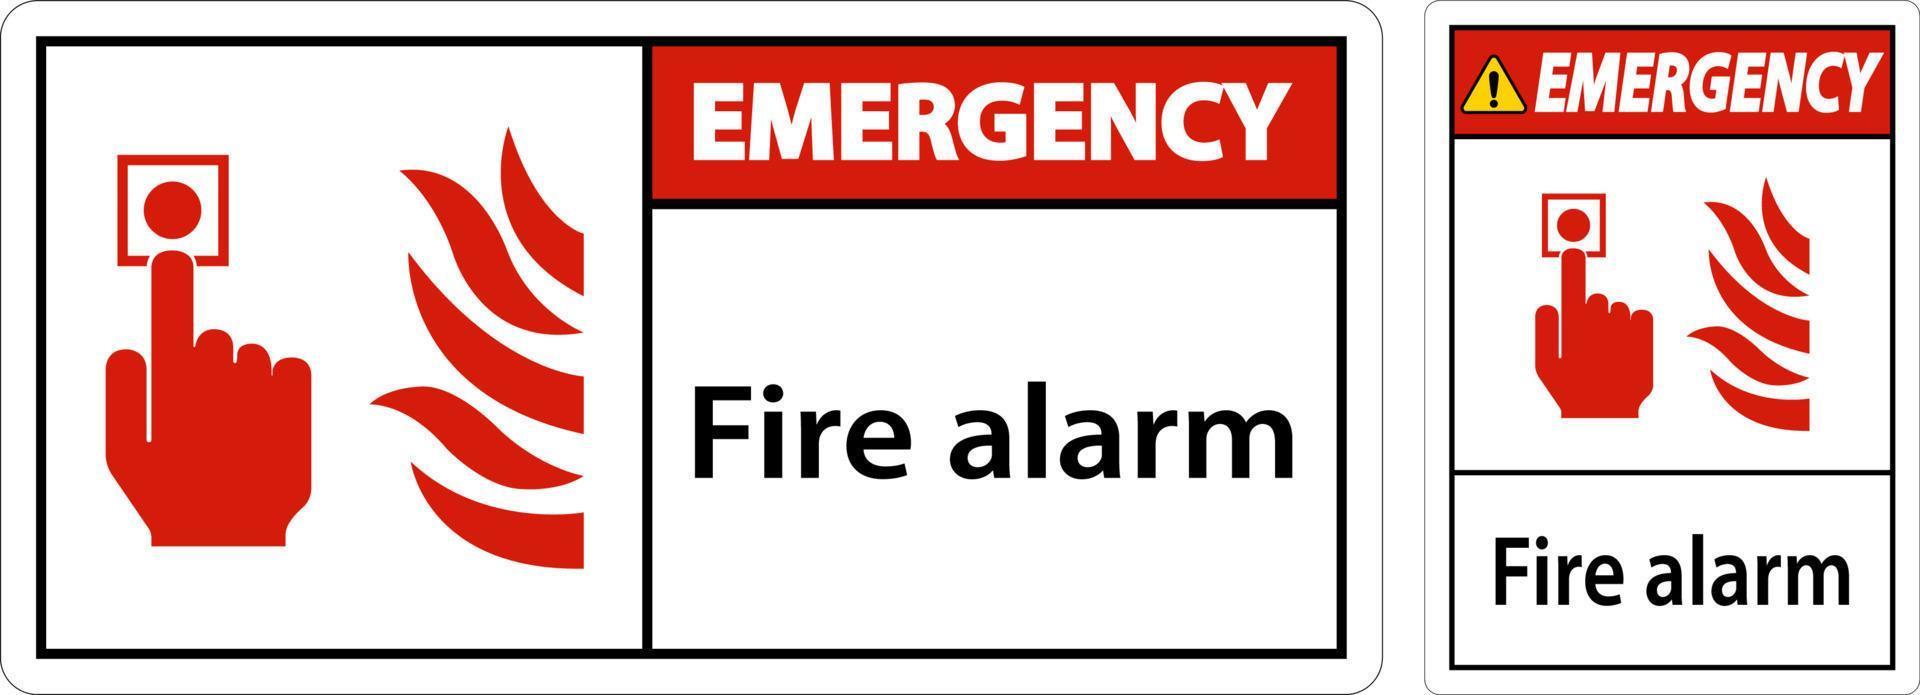 Emergency Fire Alarm Sign On White Background vector